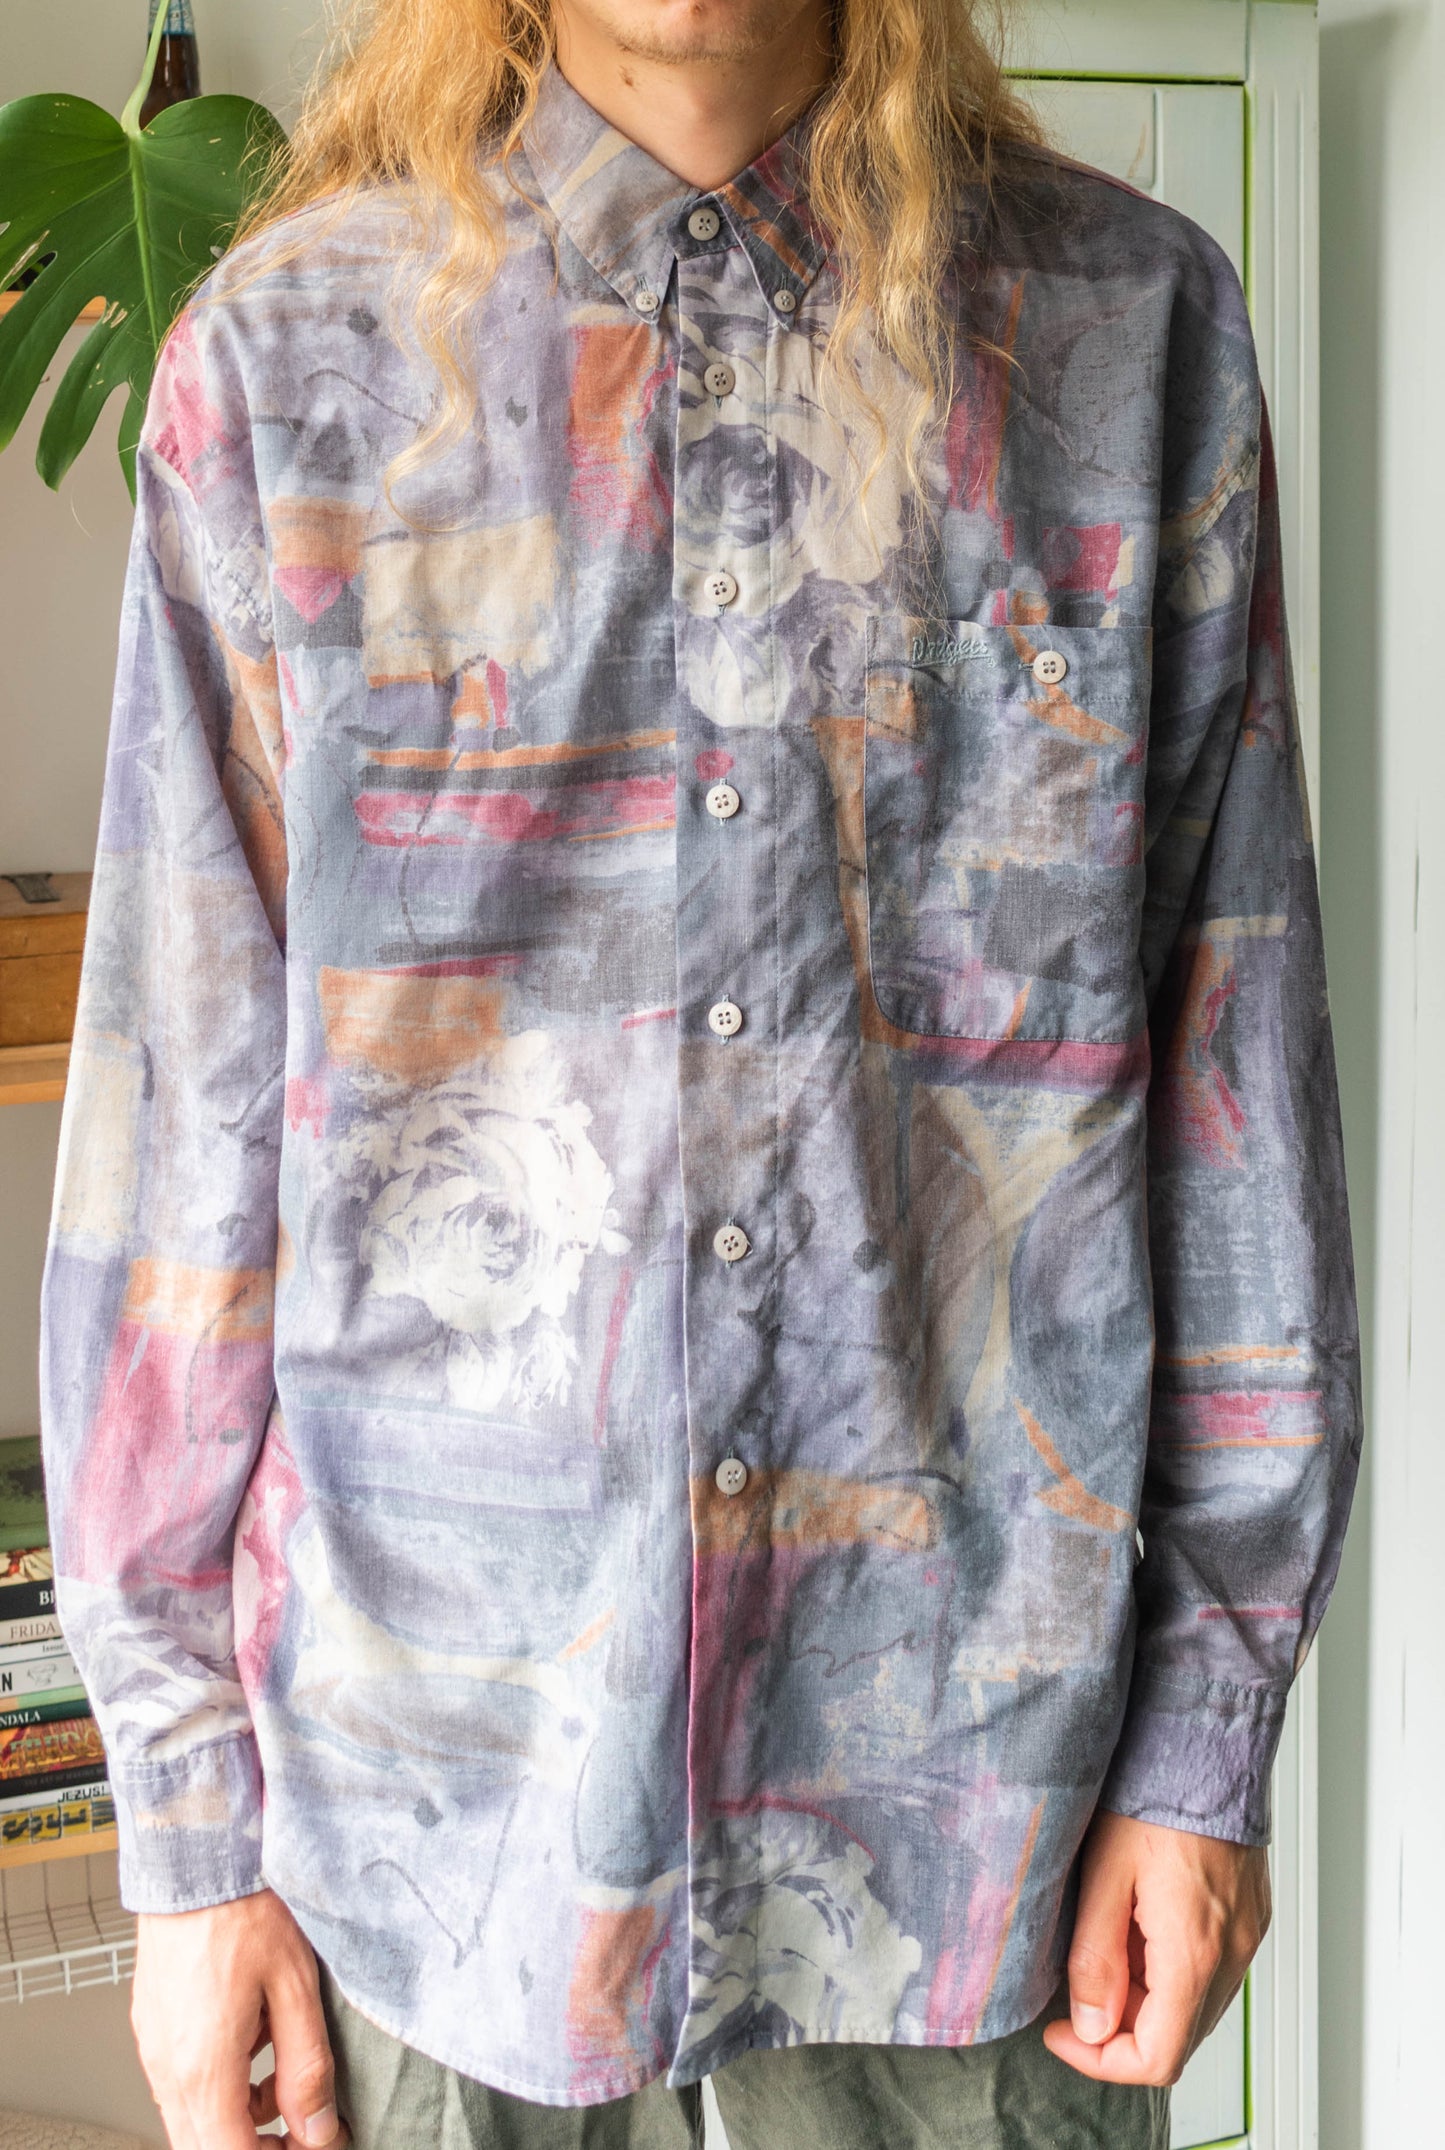 NEW IN! Vintage blouse